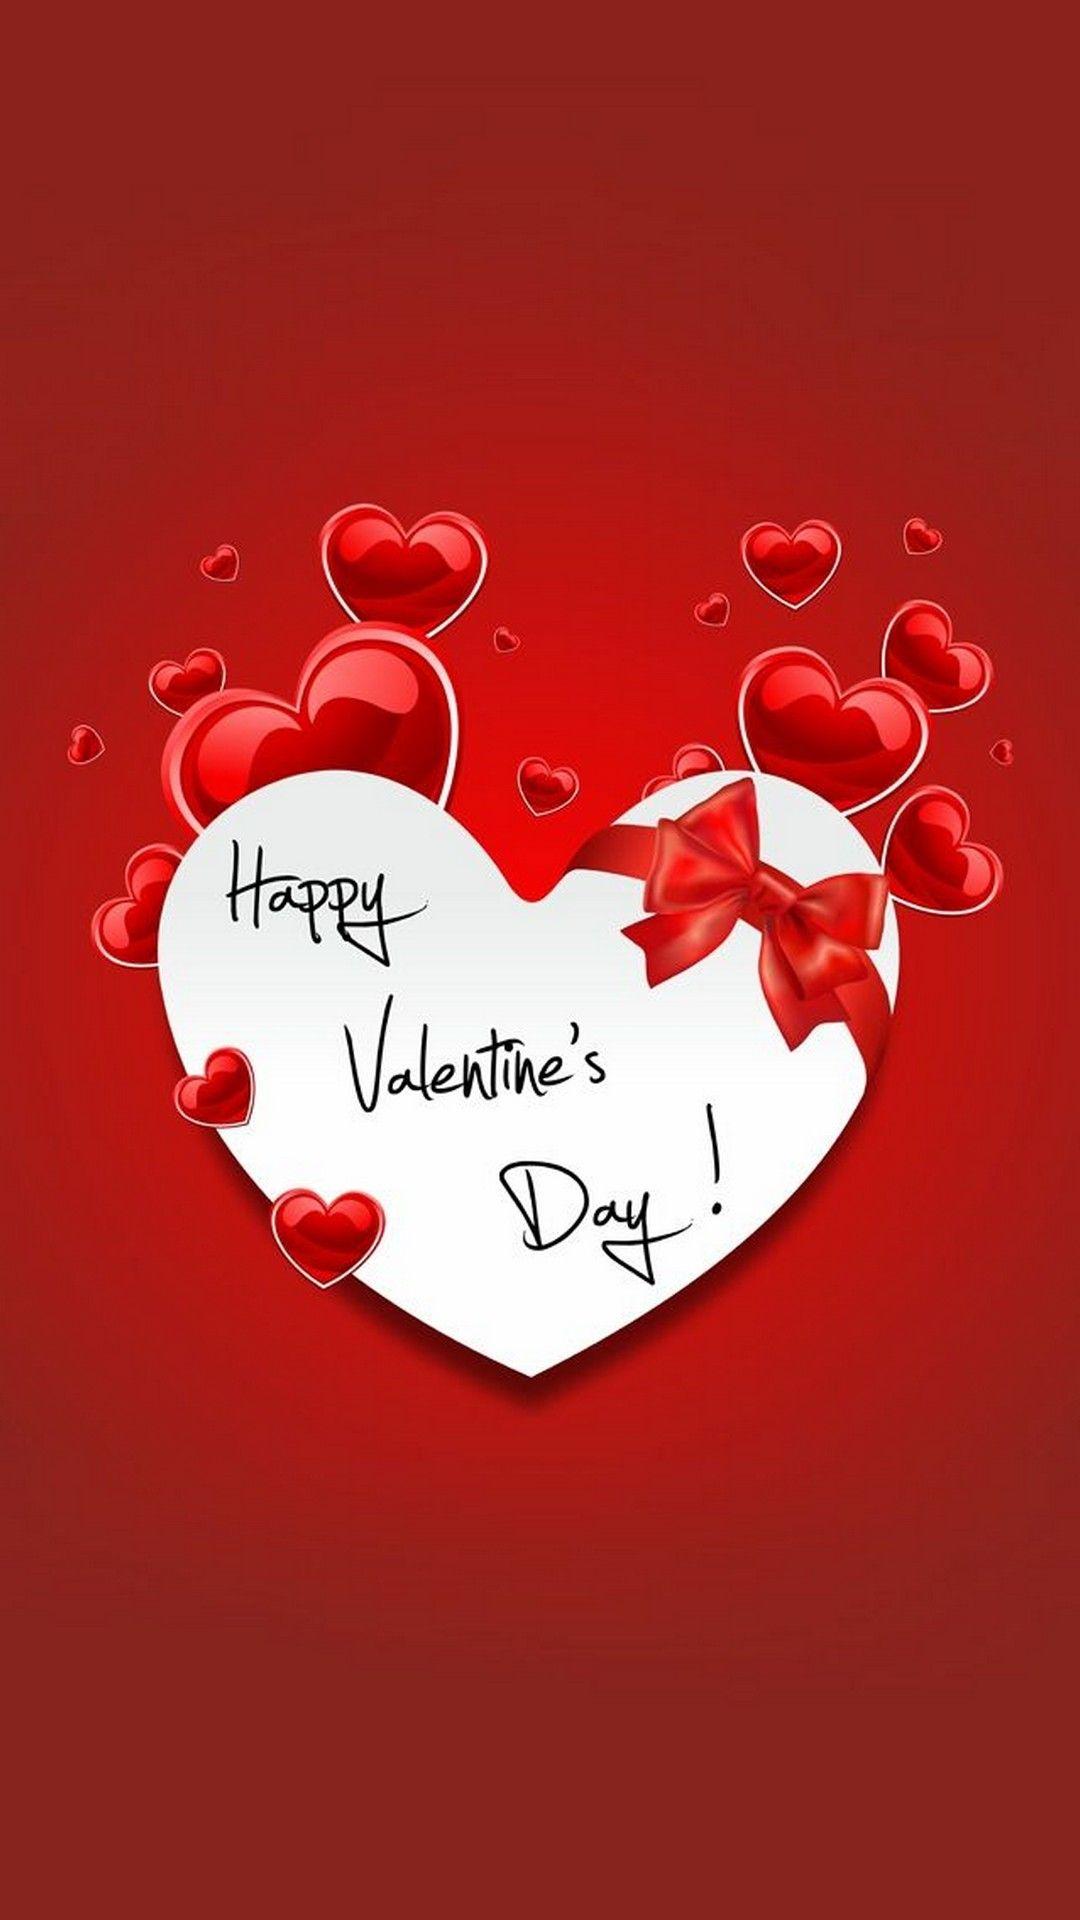 Wallpaper Happy Valentines Day Image Android Android Wallpaper